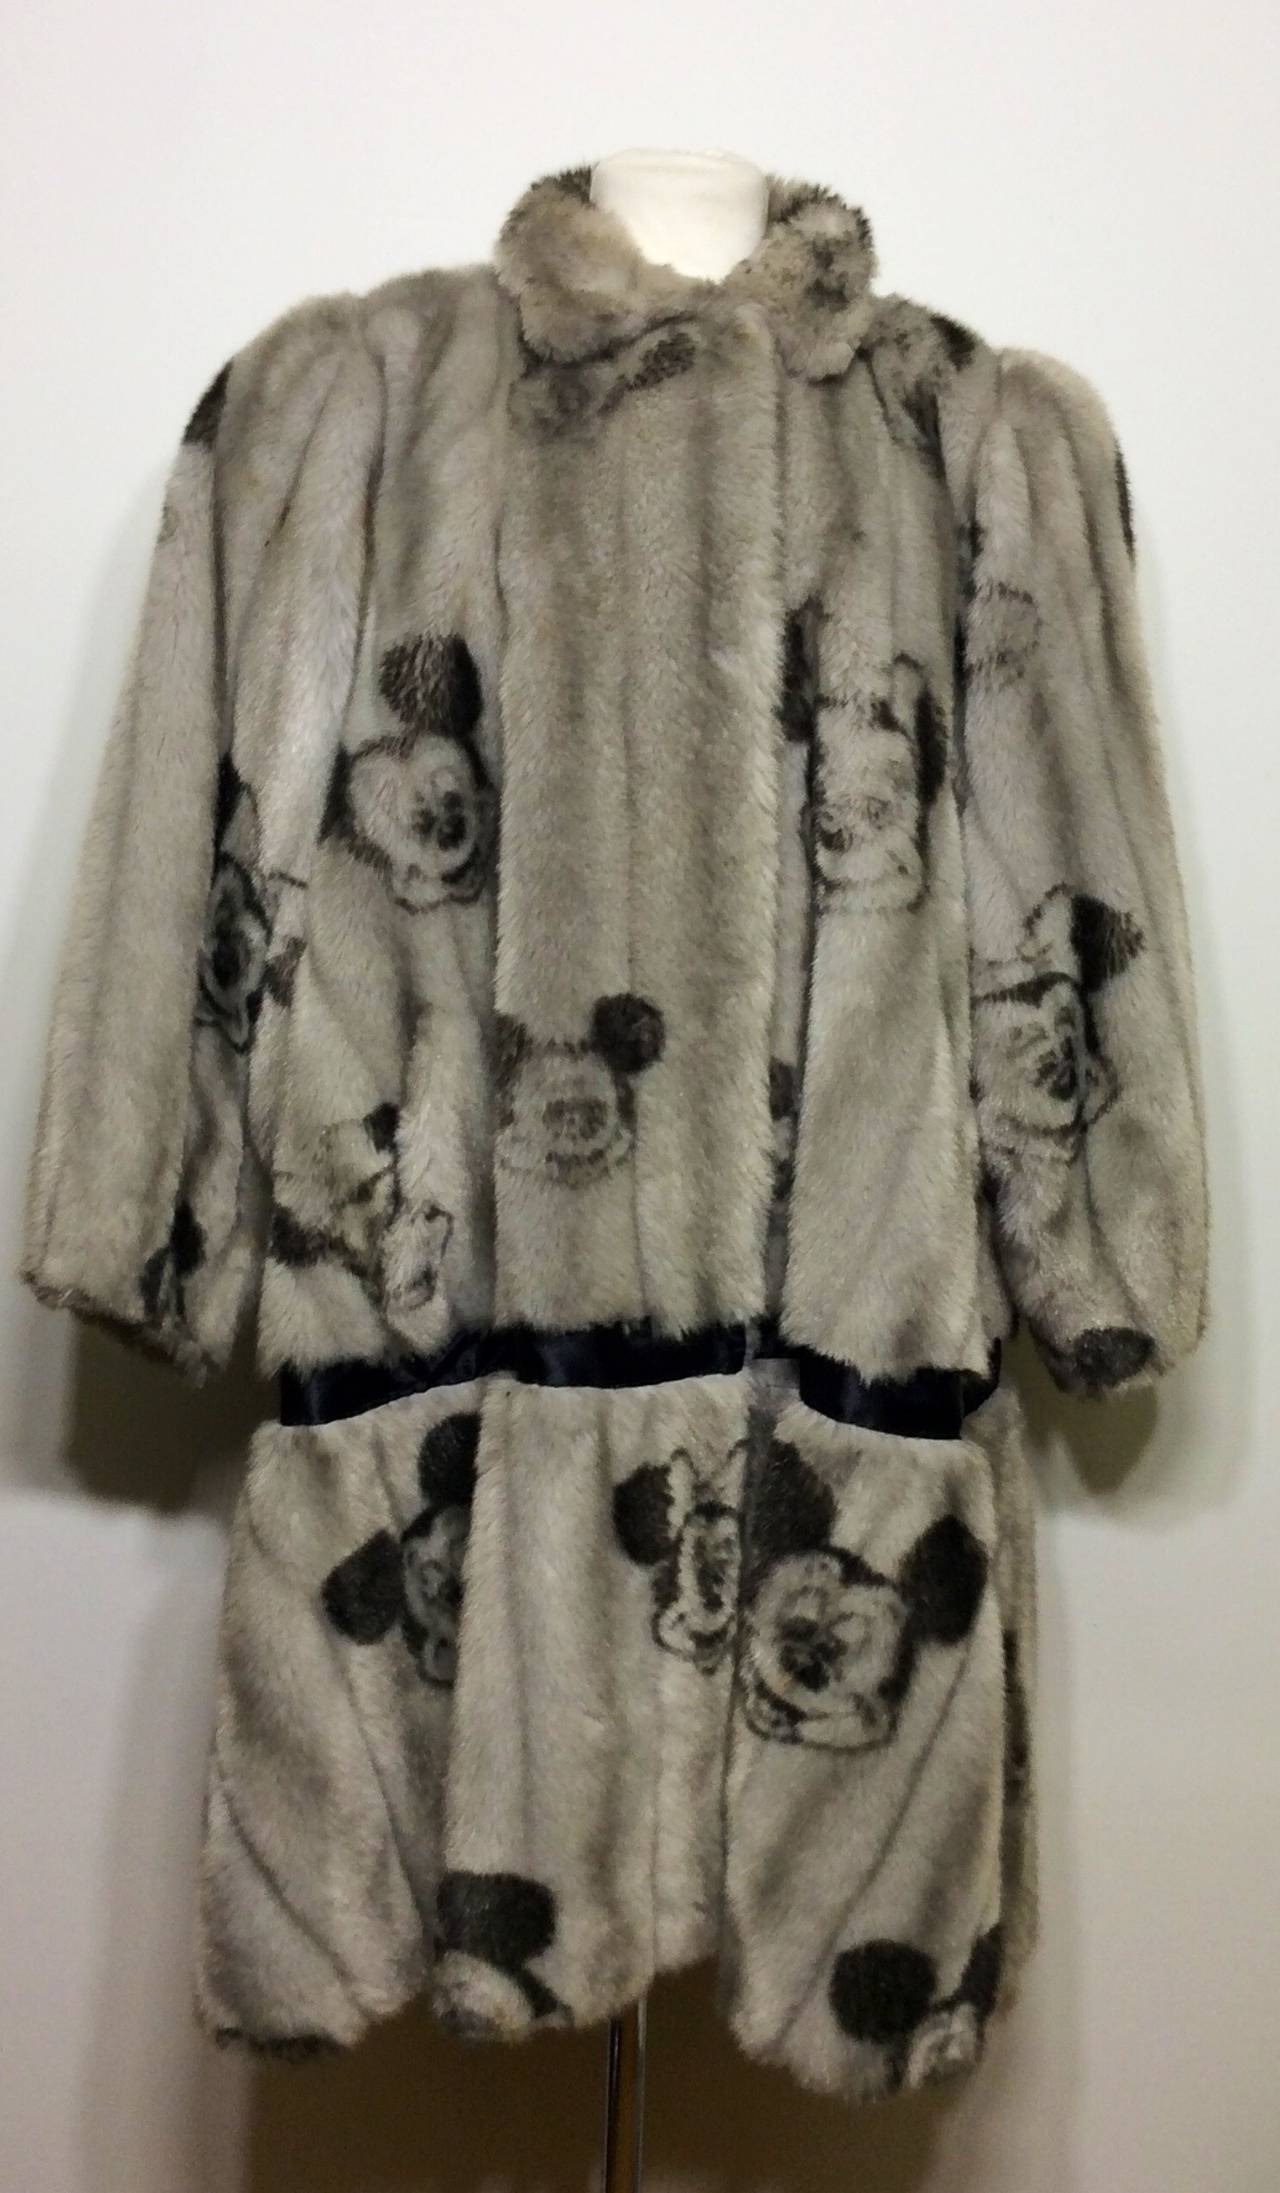 Vintage Minnie & Mickey Mouse grey faux fur coat from Apparence France. This ultra soft faux fur was created as part of a limited collection.  The coat features dual waist level pockets and front closures. 
Fully lined. 
Made in France

Underarm